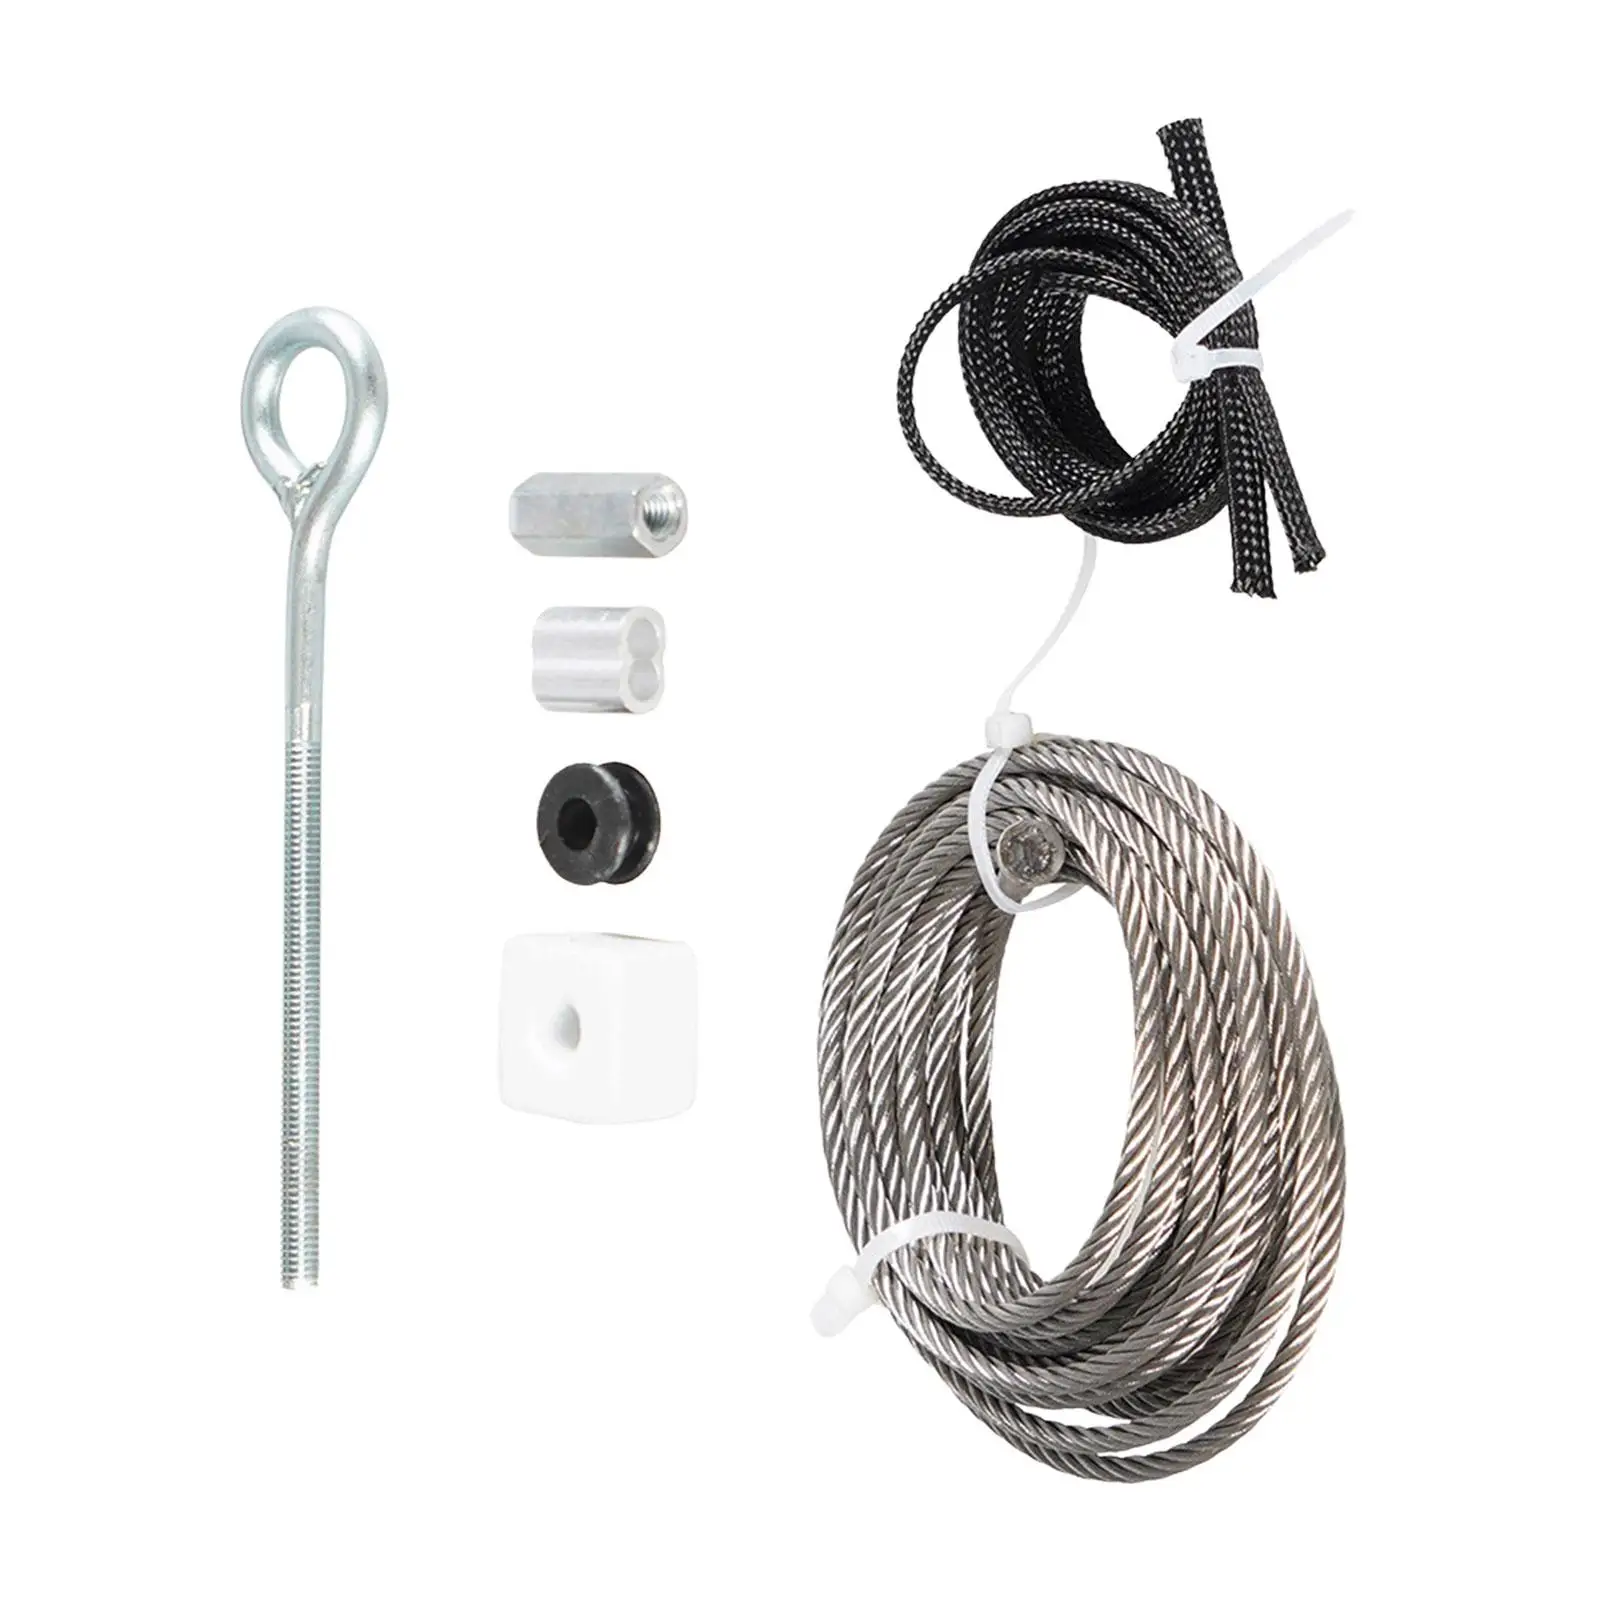 RV Cable Repair Set High Performance Easy to Install Universal Replacement Parts for Accuslide System